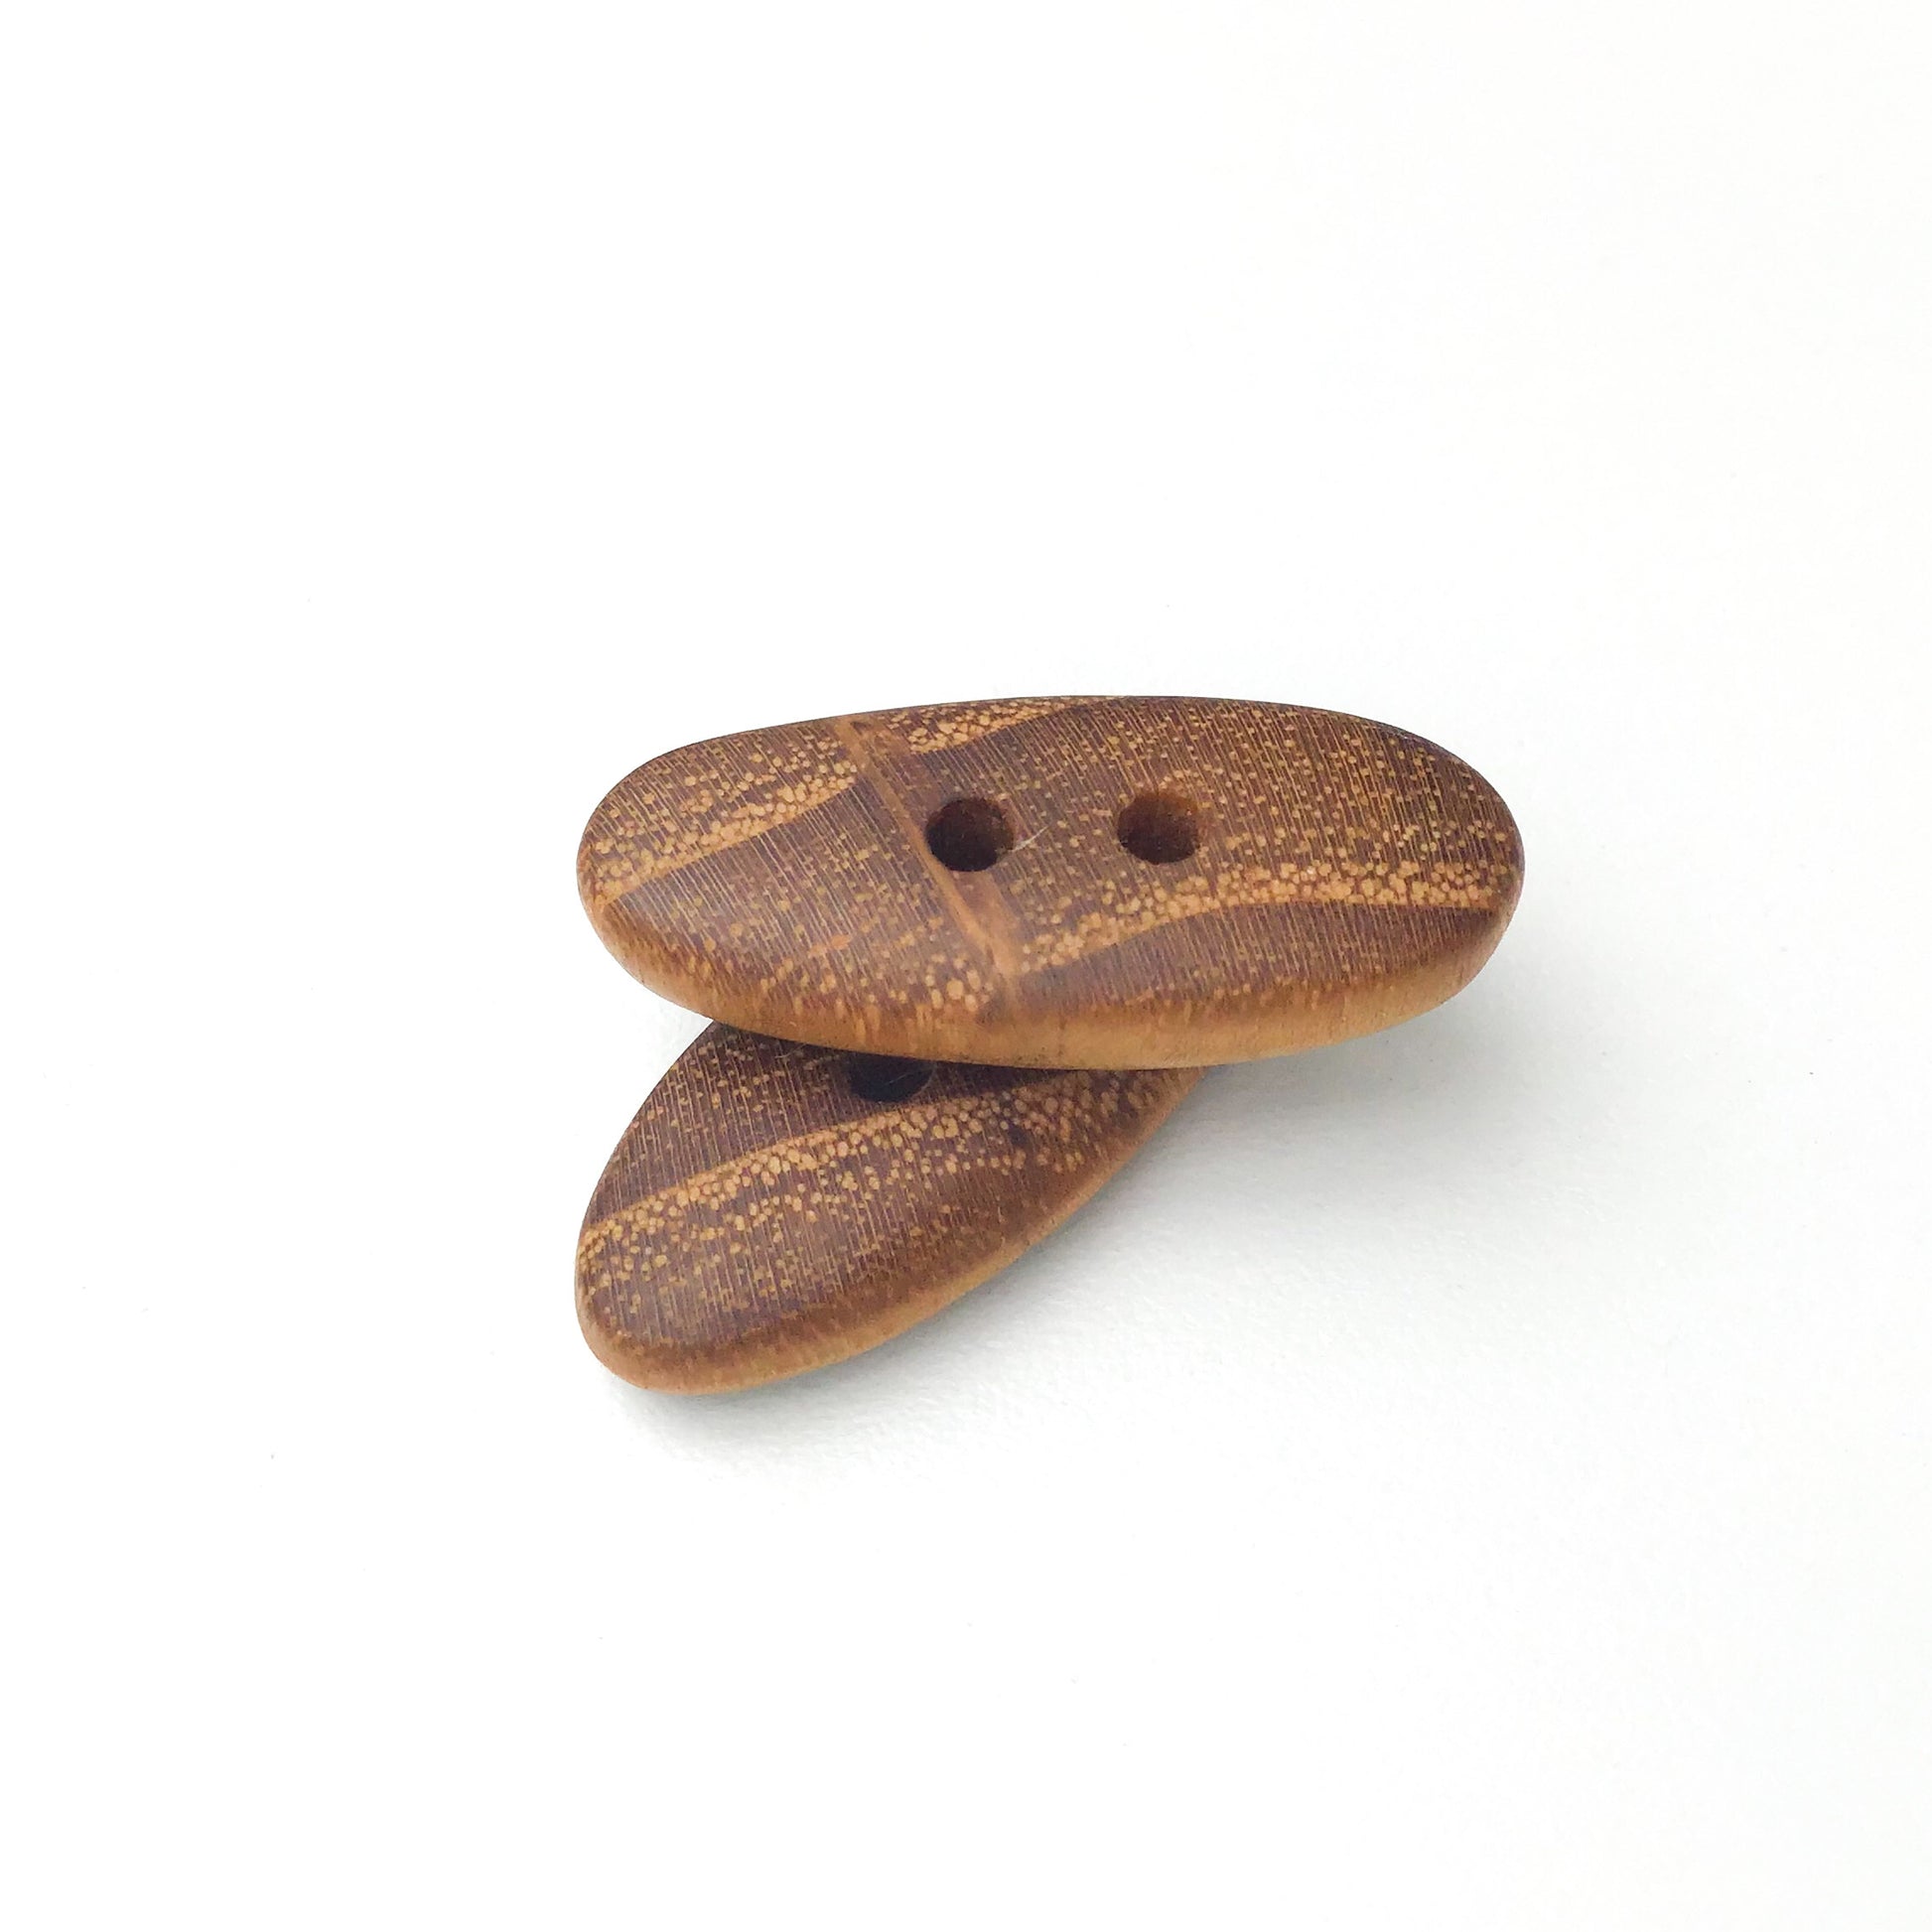 Black Wood Toggle Buttons